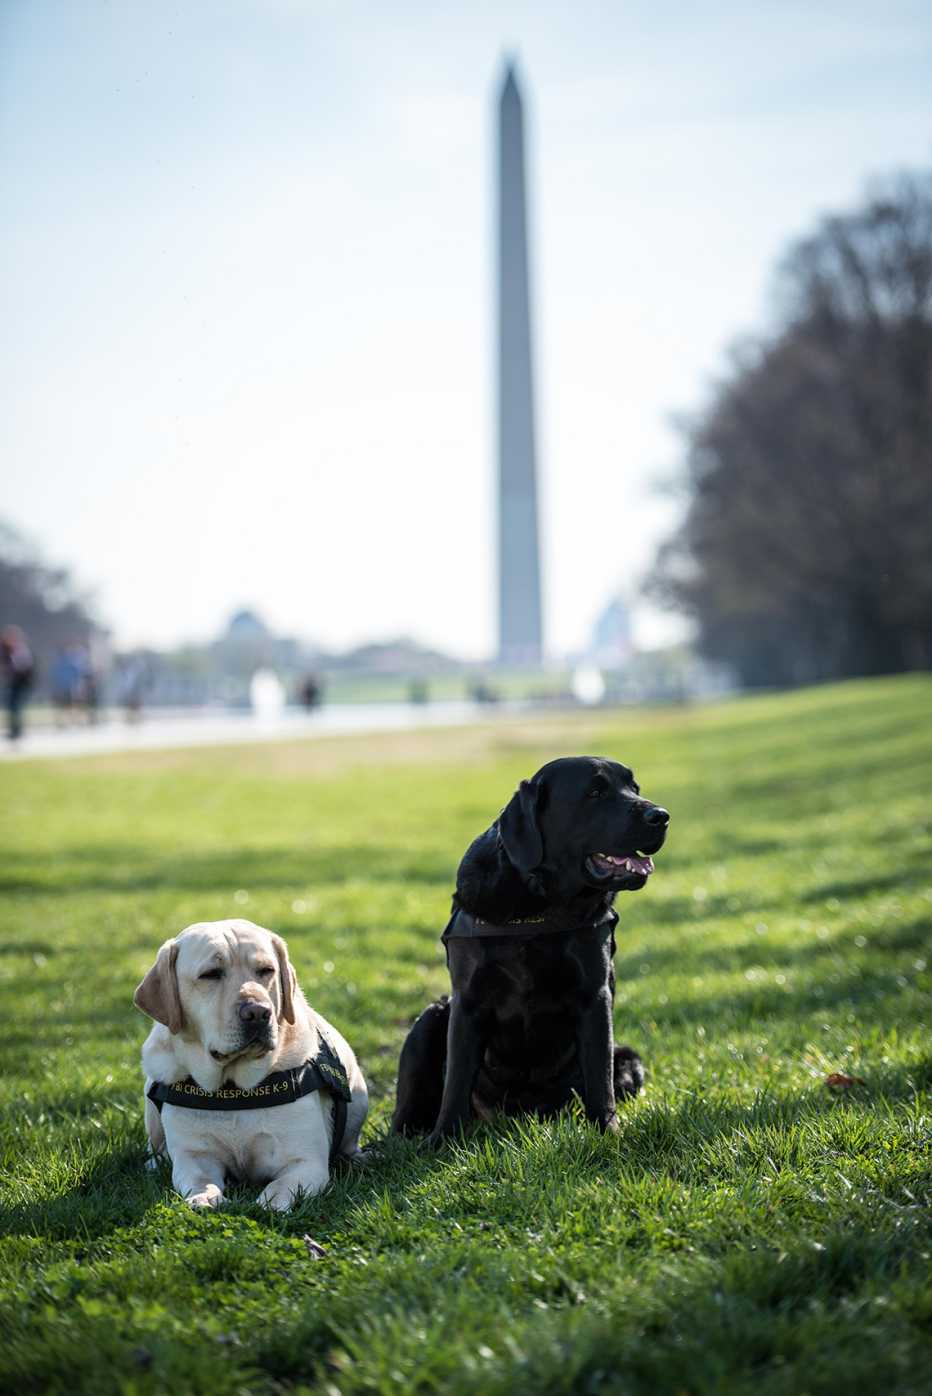 f b i crisis response dogs wally and gio sit on the national mall with the washington monument in the background